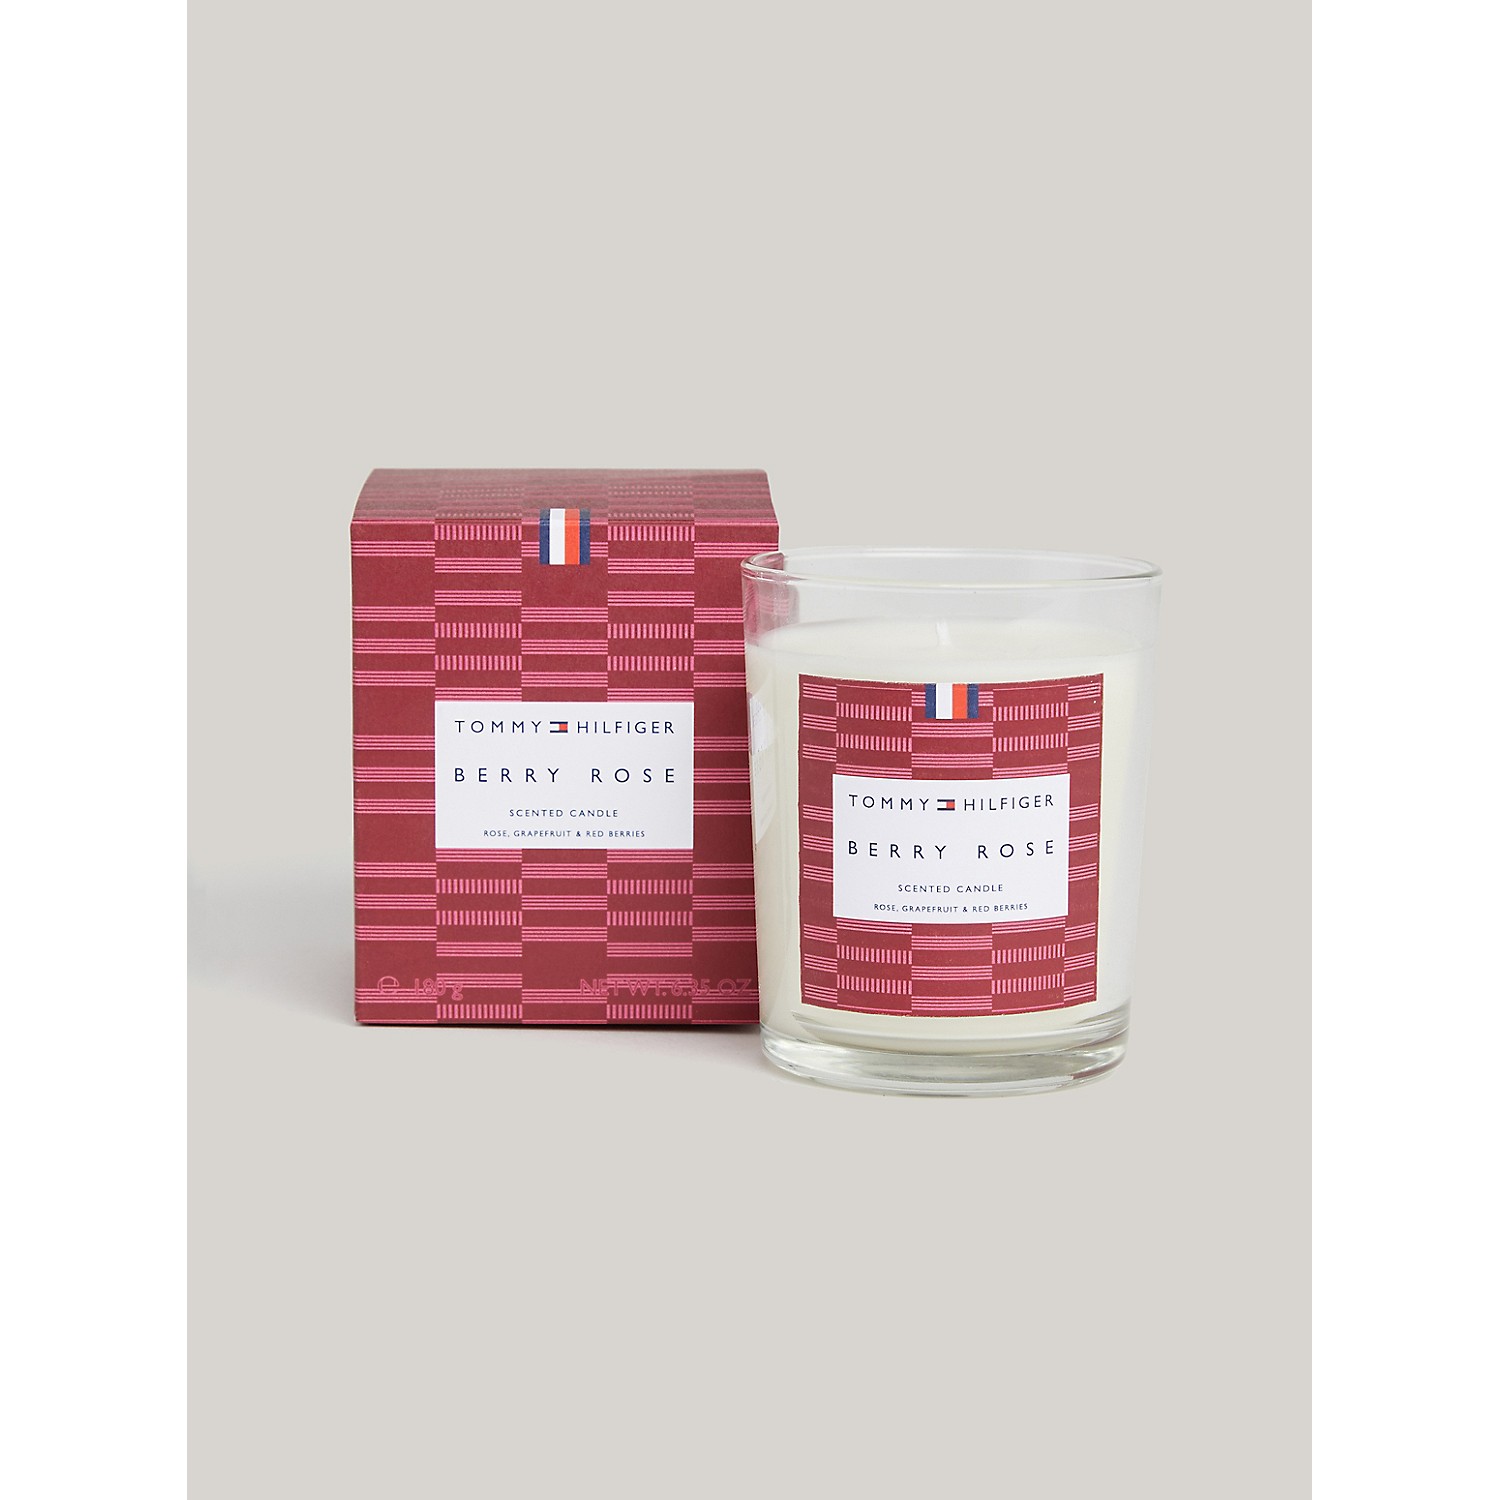 TOMMY HILFIGER Berry Rose Single Wick Candle - 6.35 oz